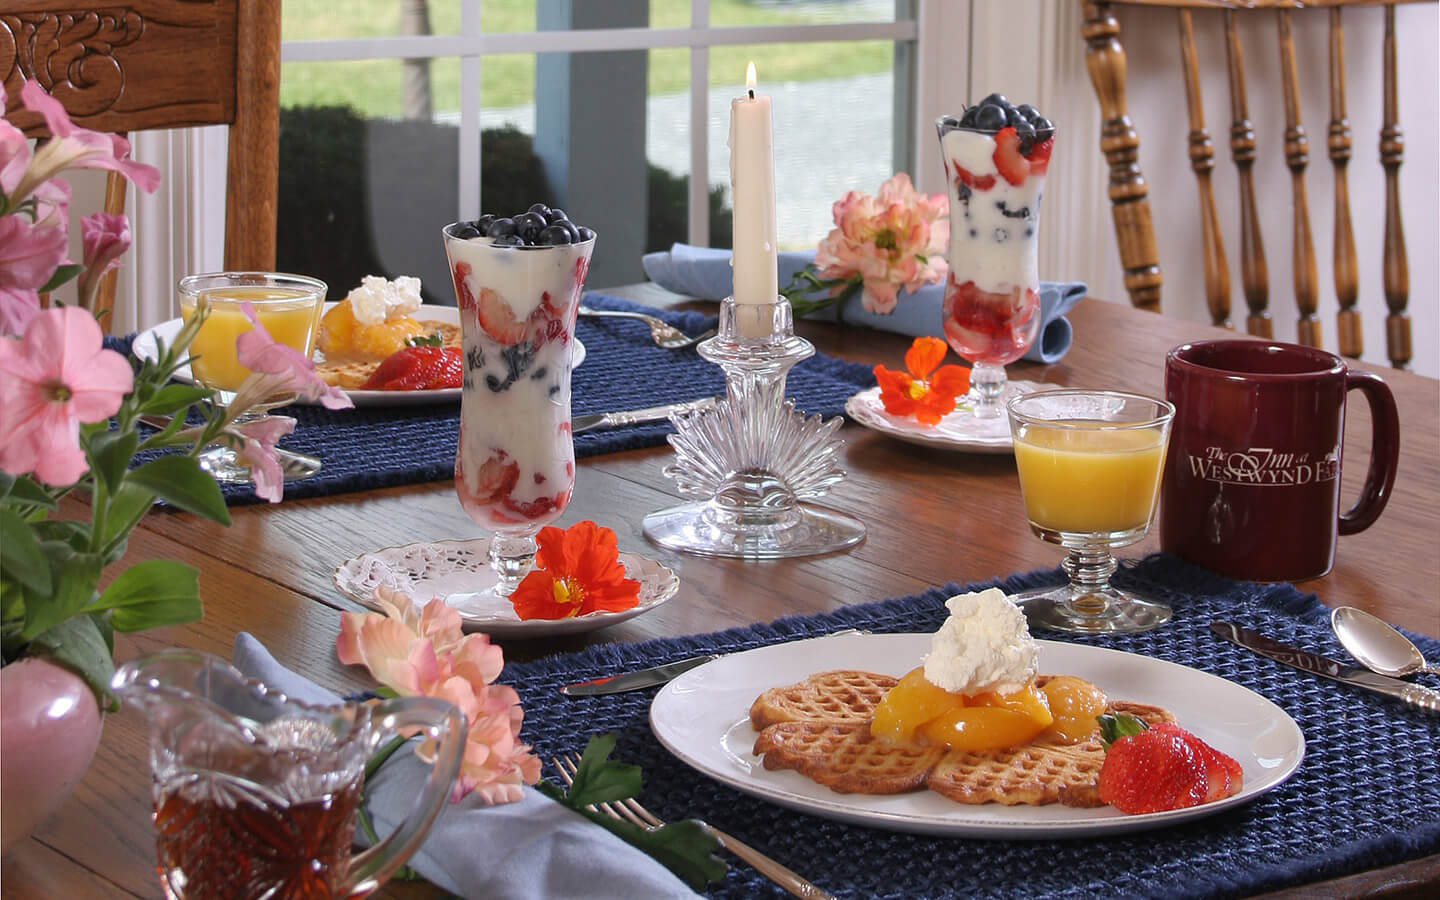 Breakfast is served at our bed and breakfast in Hershey, PA